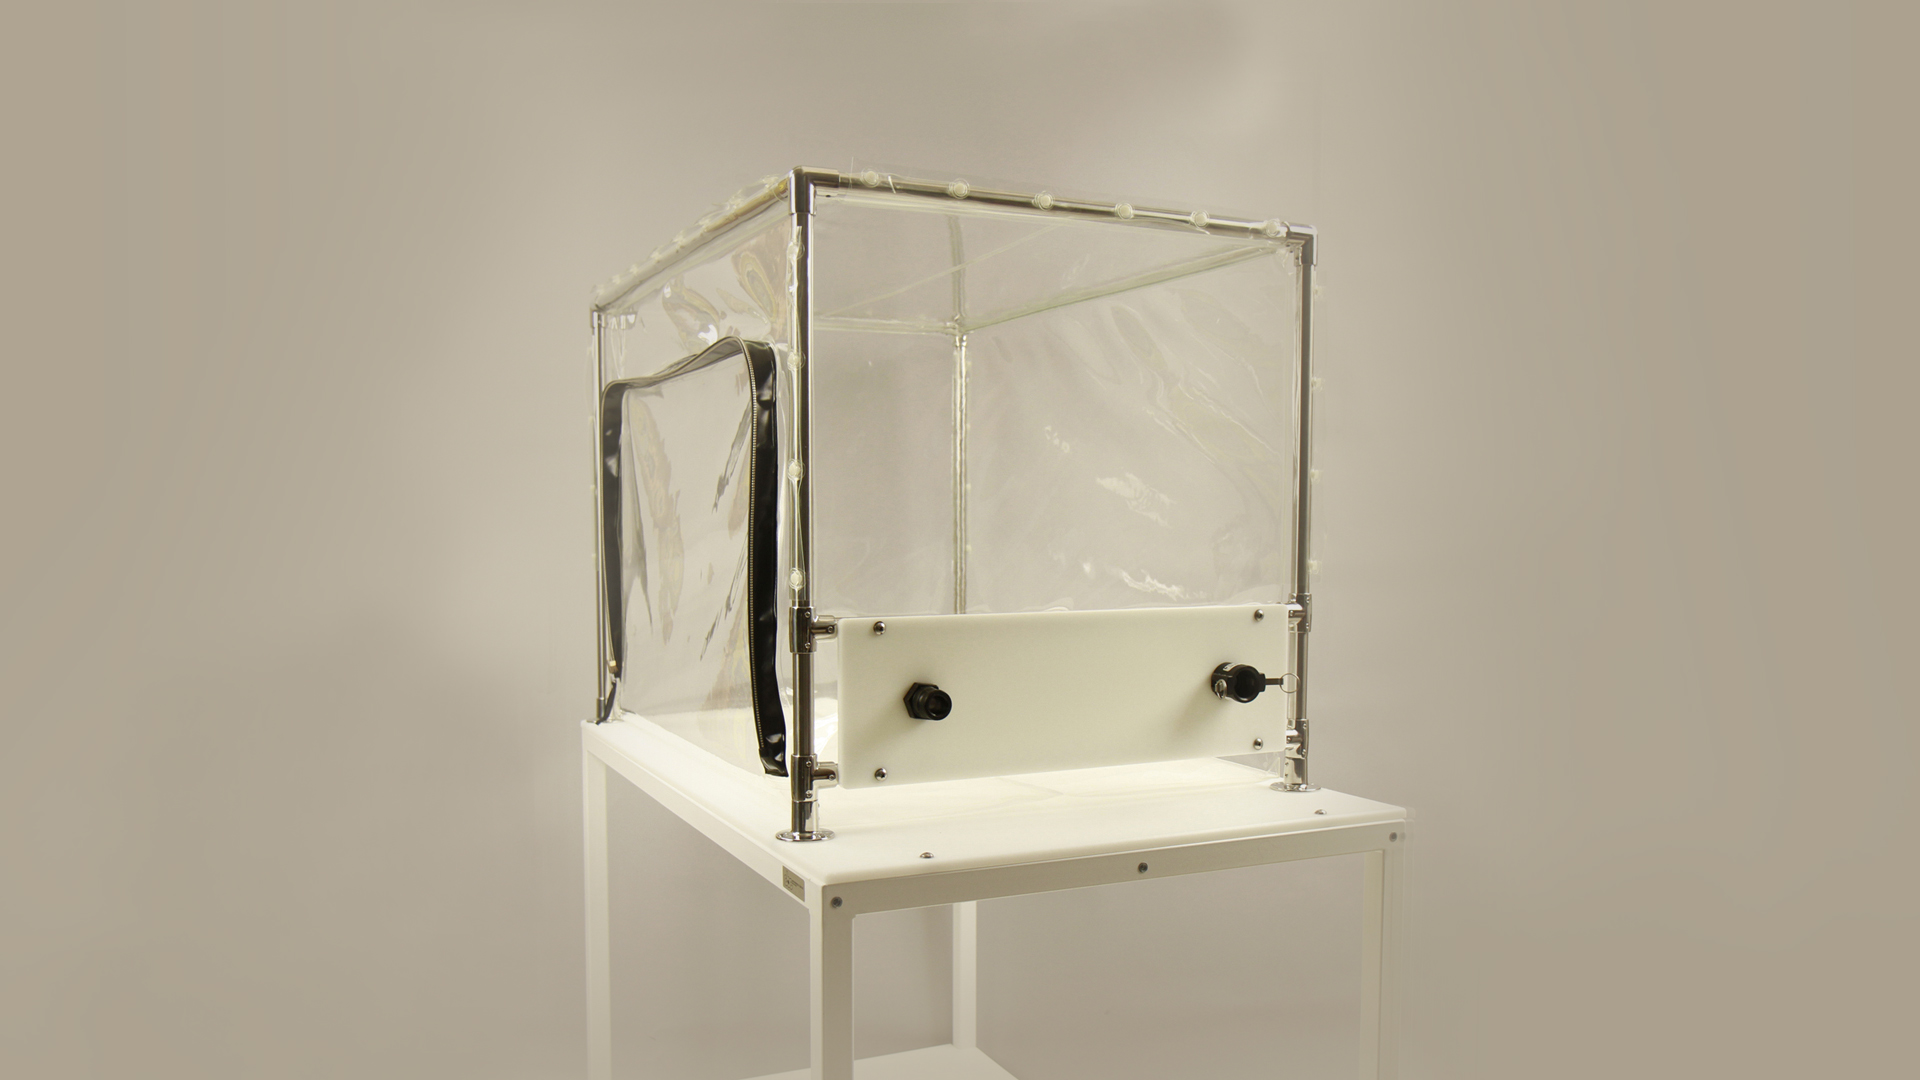 Decontamination Chambers for small items such as scales and microscopes.